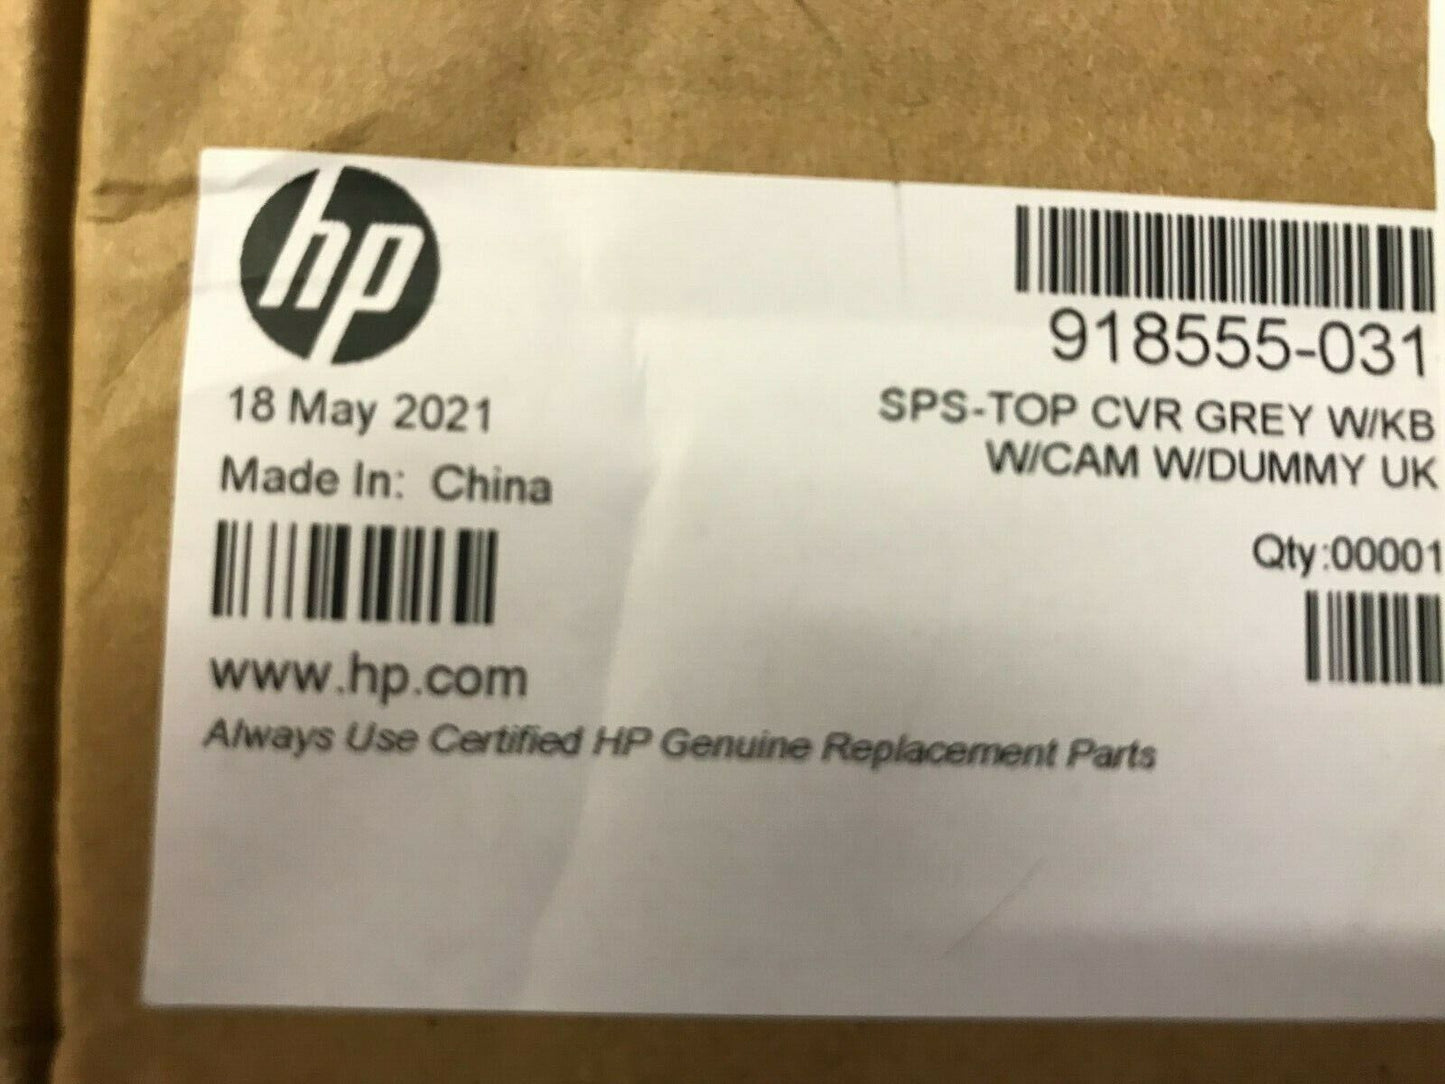 NEW Genuine HP 918555-031 PROBOOX X360 11 TOP COVER WITH UK KEYBOARD